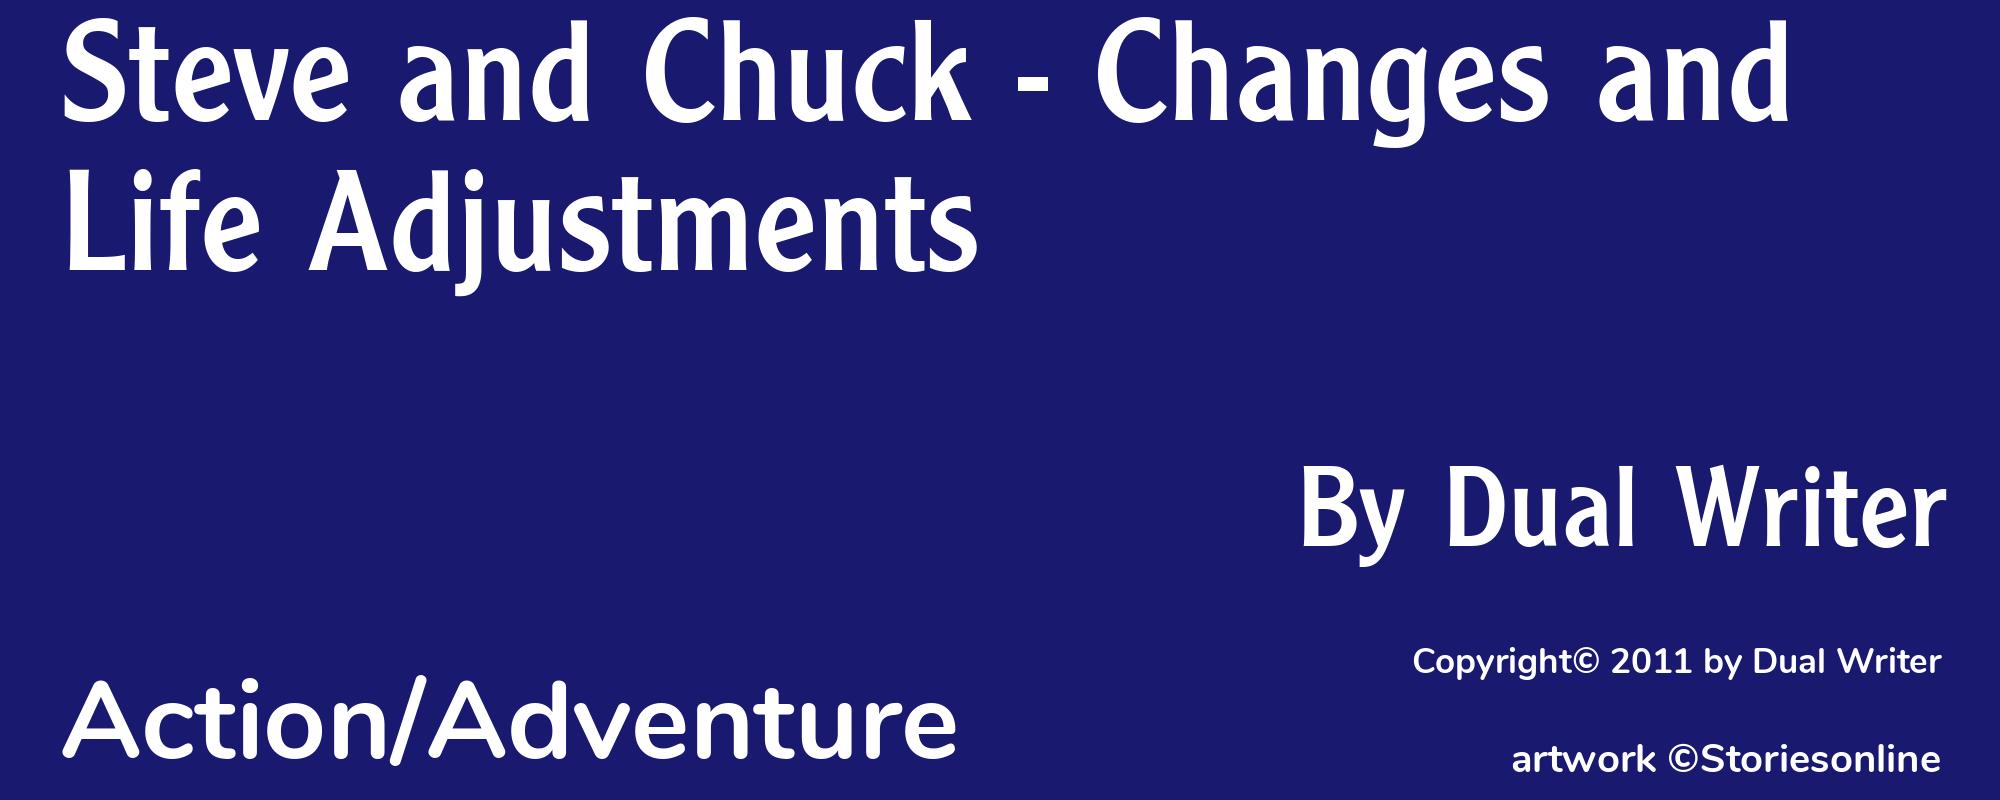 Steve and Chuck - Changes and Life Adjustments - Cover